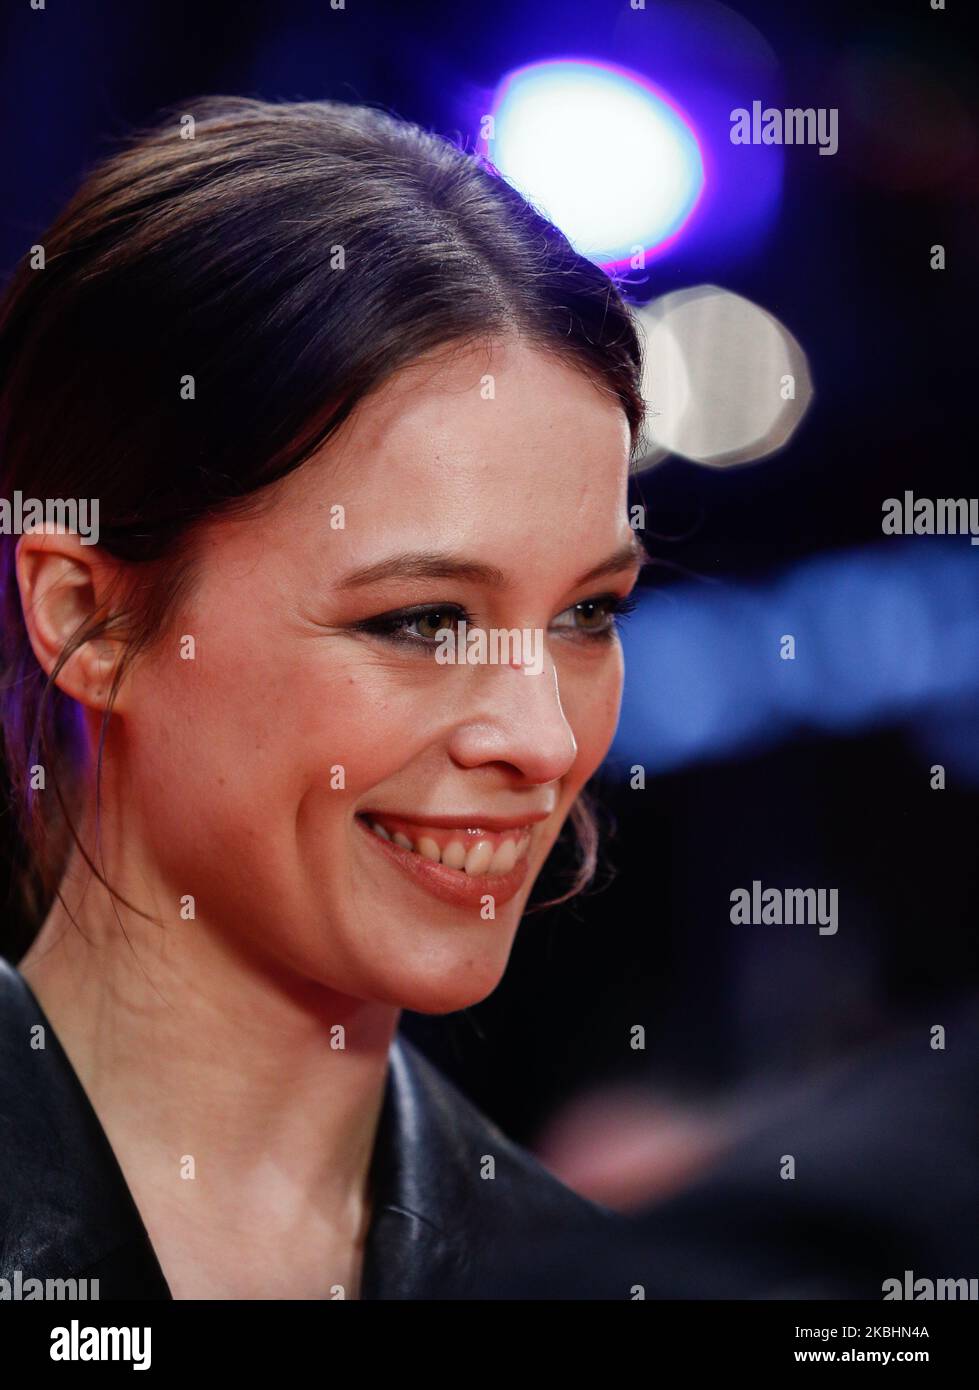 German Actress Paula Beer Pose At The Undine Premiere During The 70th Berlinale International